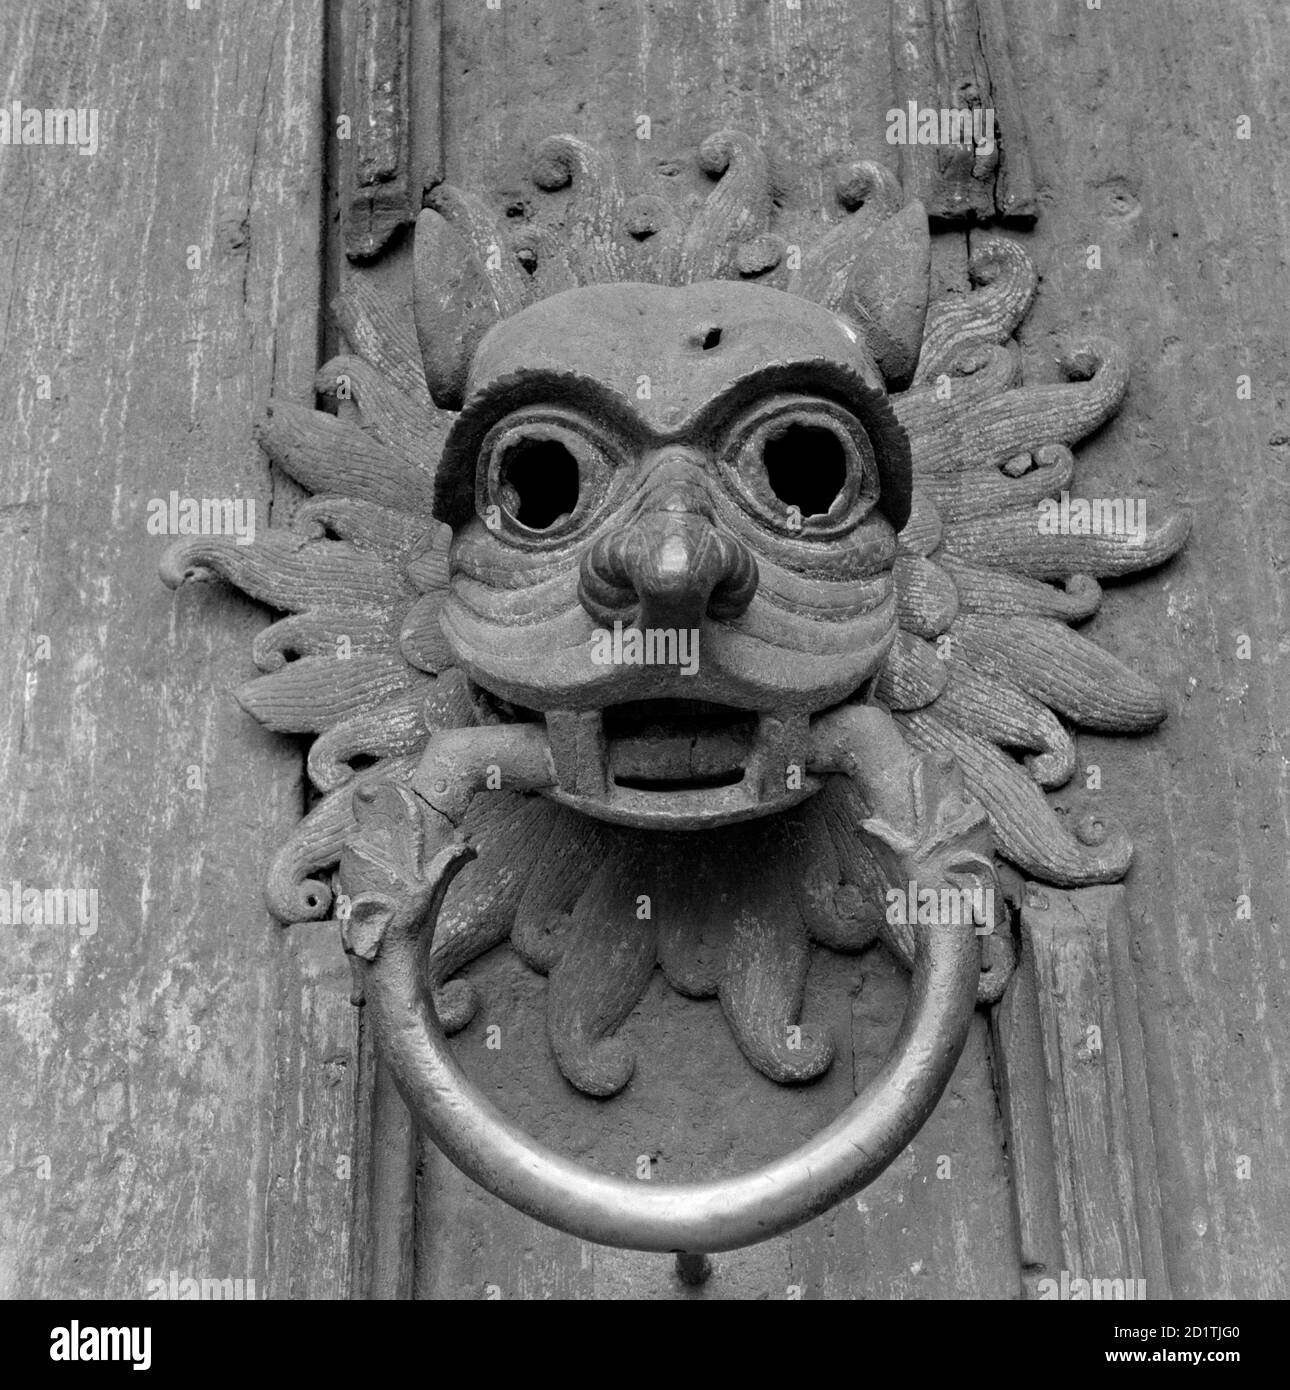 DURHAM CATHEDRAL, Durham. The famous Sanctuary door knocker on the north door of Durham Cathedral. The north door dates from 1140. Photographed by Eric de Mare between 1945 and 1980. Stock Photo